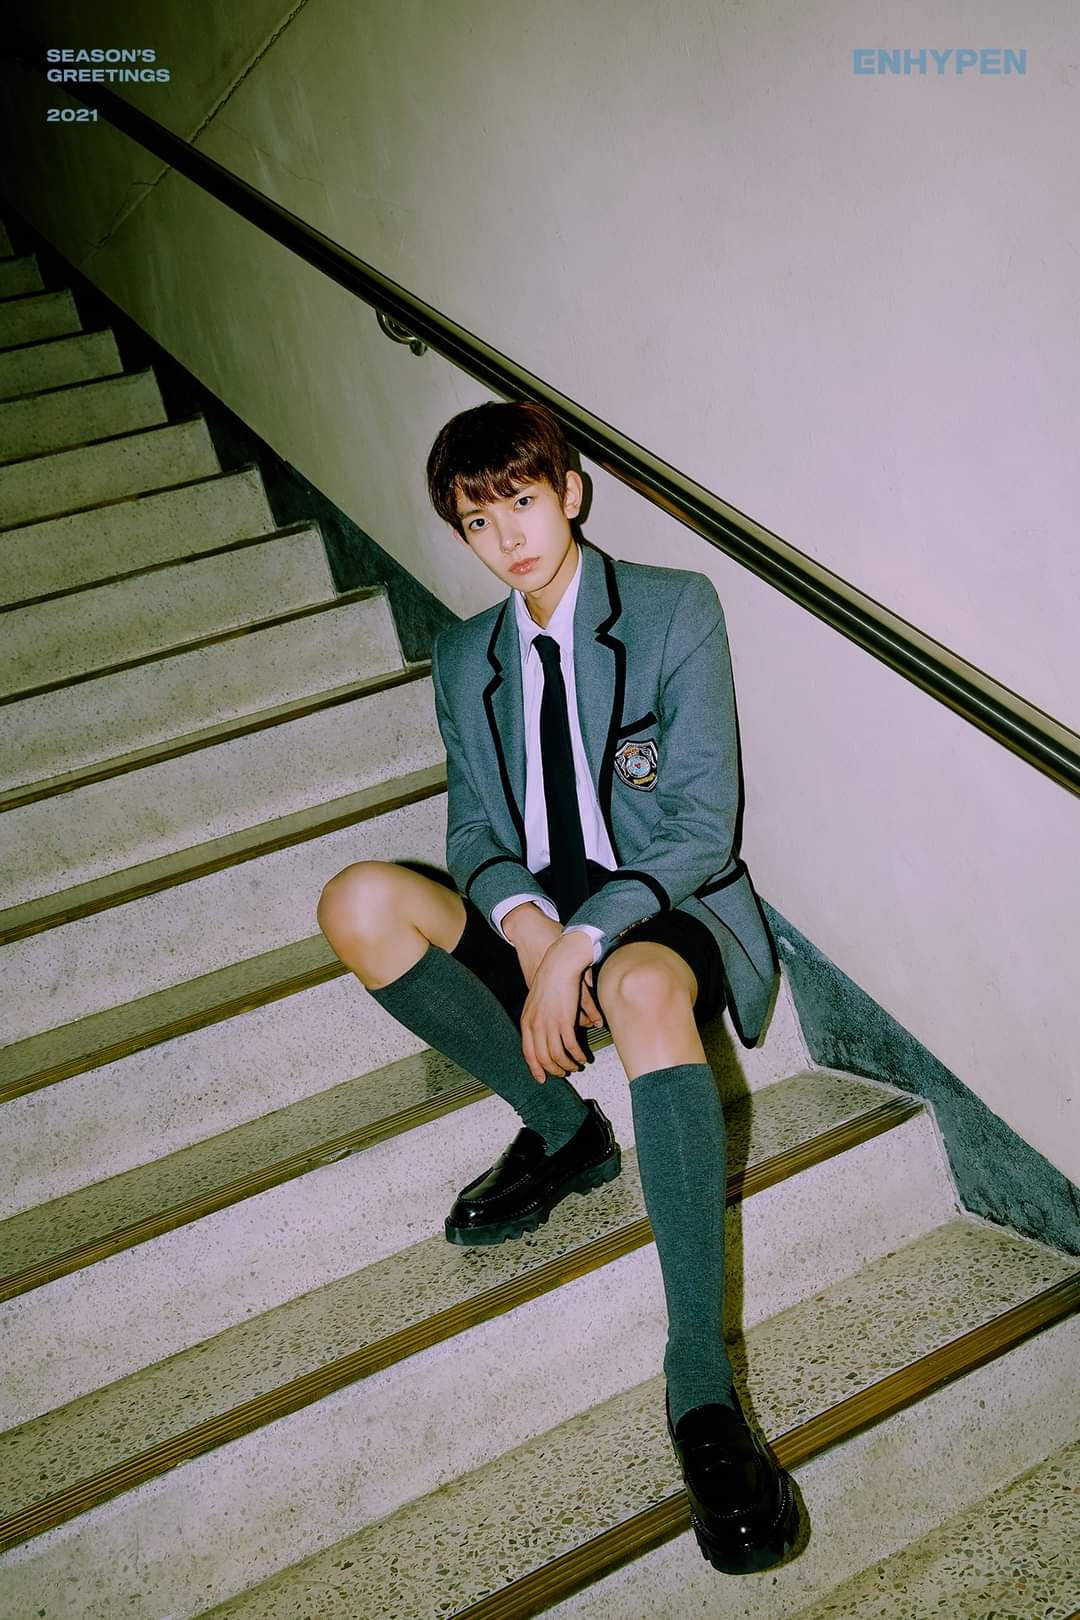 Enhypen Member Heeseung On The Stairs Background